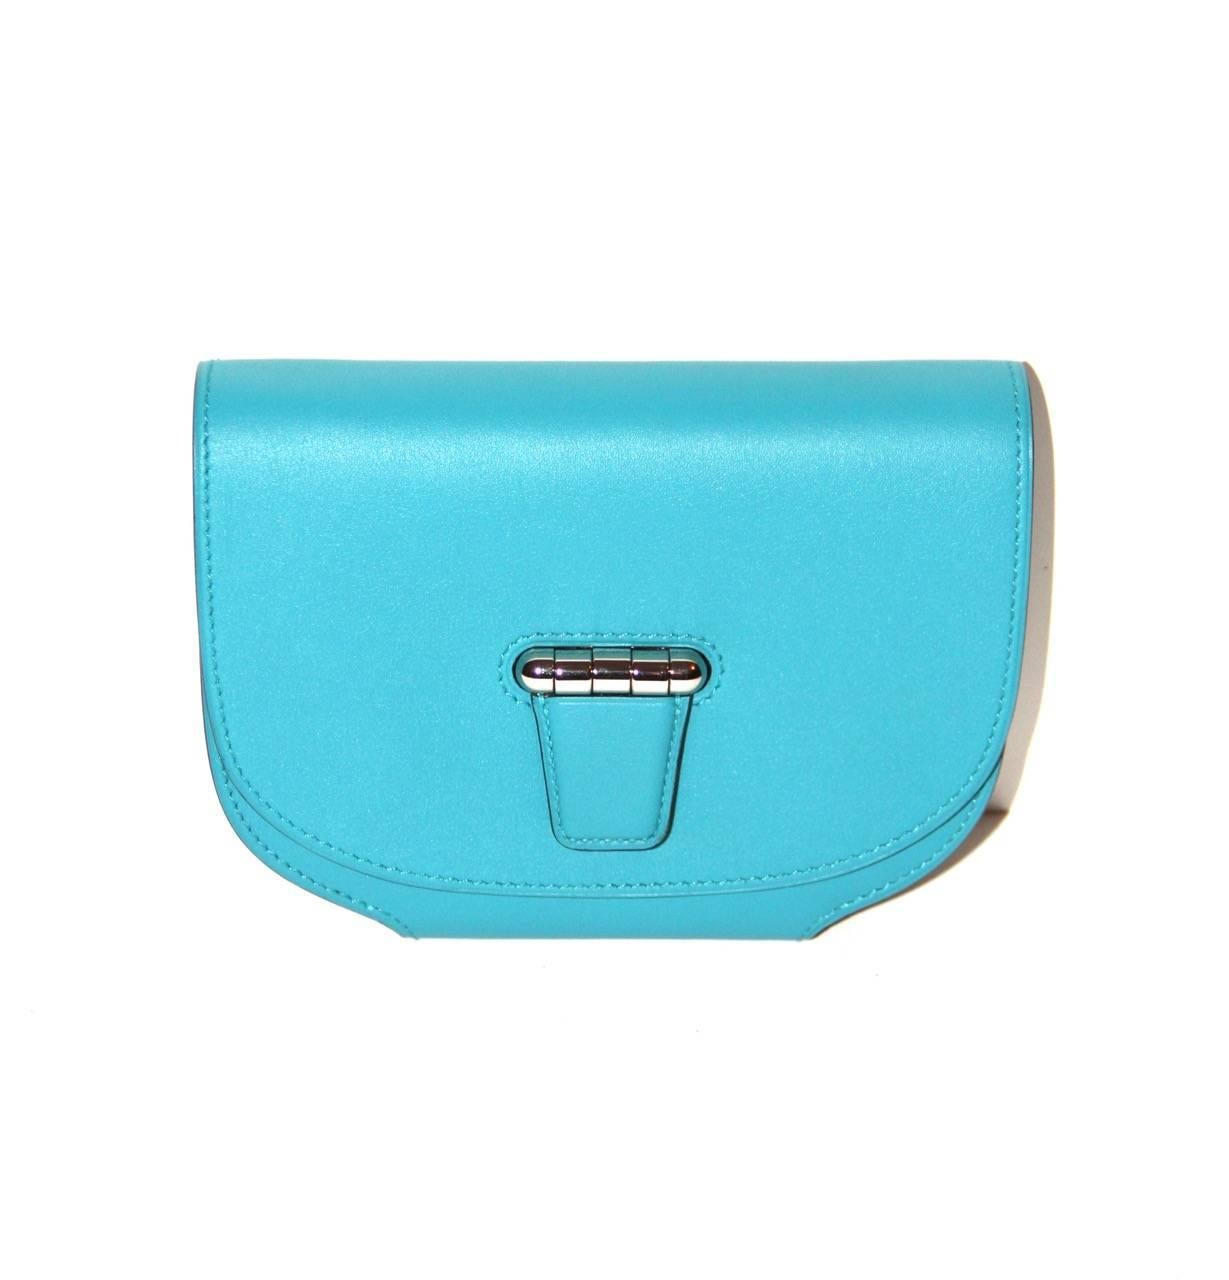 The Micro Convoyeur is a wallet with a removable shoulder strap and is inspired by the Convoyeur bag from the Fall 2013 collection. 

Collection: 2014
Leather: Swift
Color: Turquoise Blue
Hardware: Palladium
Measurements: Length 11.5 cm x Height 15